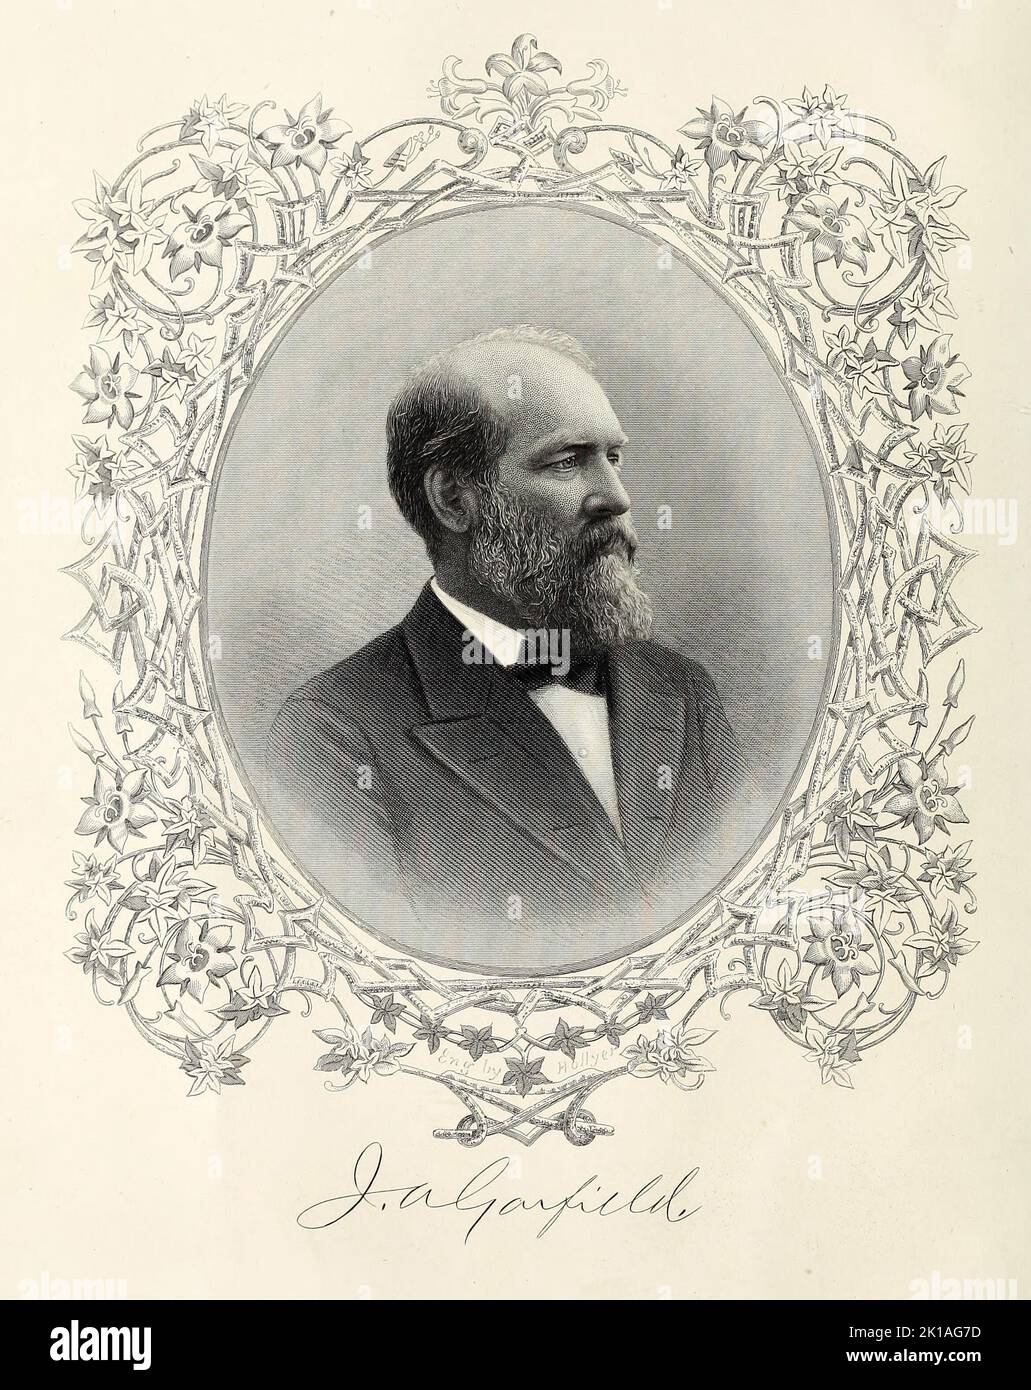 A portrait of US President James Garfield. Garfield was the 20th president of the USA, and the second to be assassinated. Stock Photo